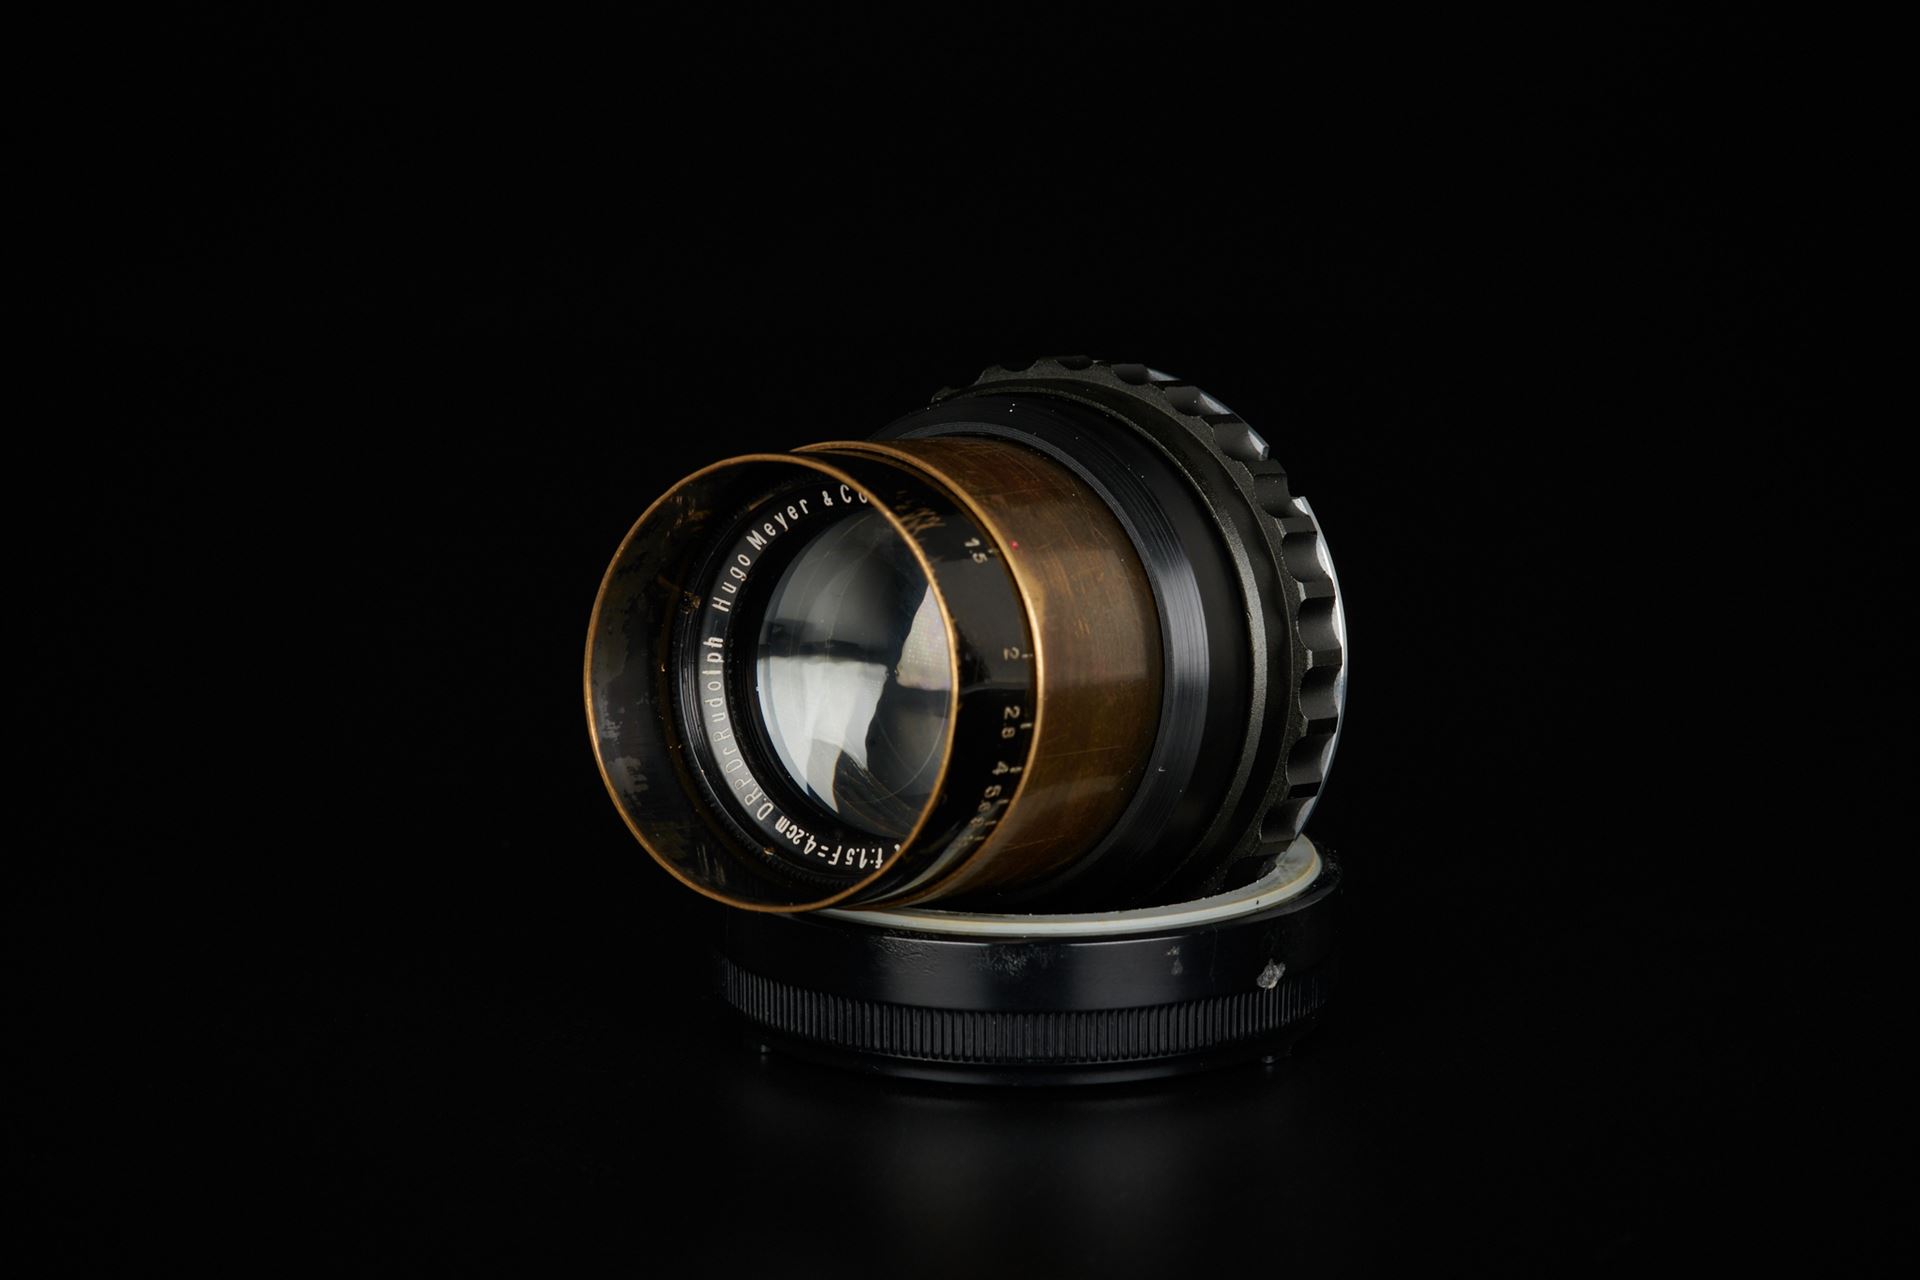 Picture of hugo meyer kino-plasmat 4.2cm f/1.5 modified for leica m